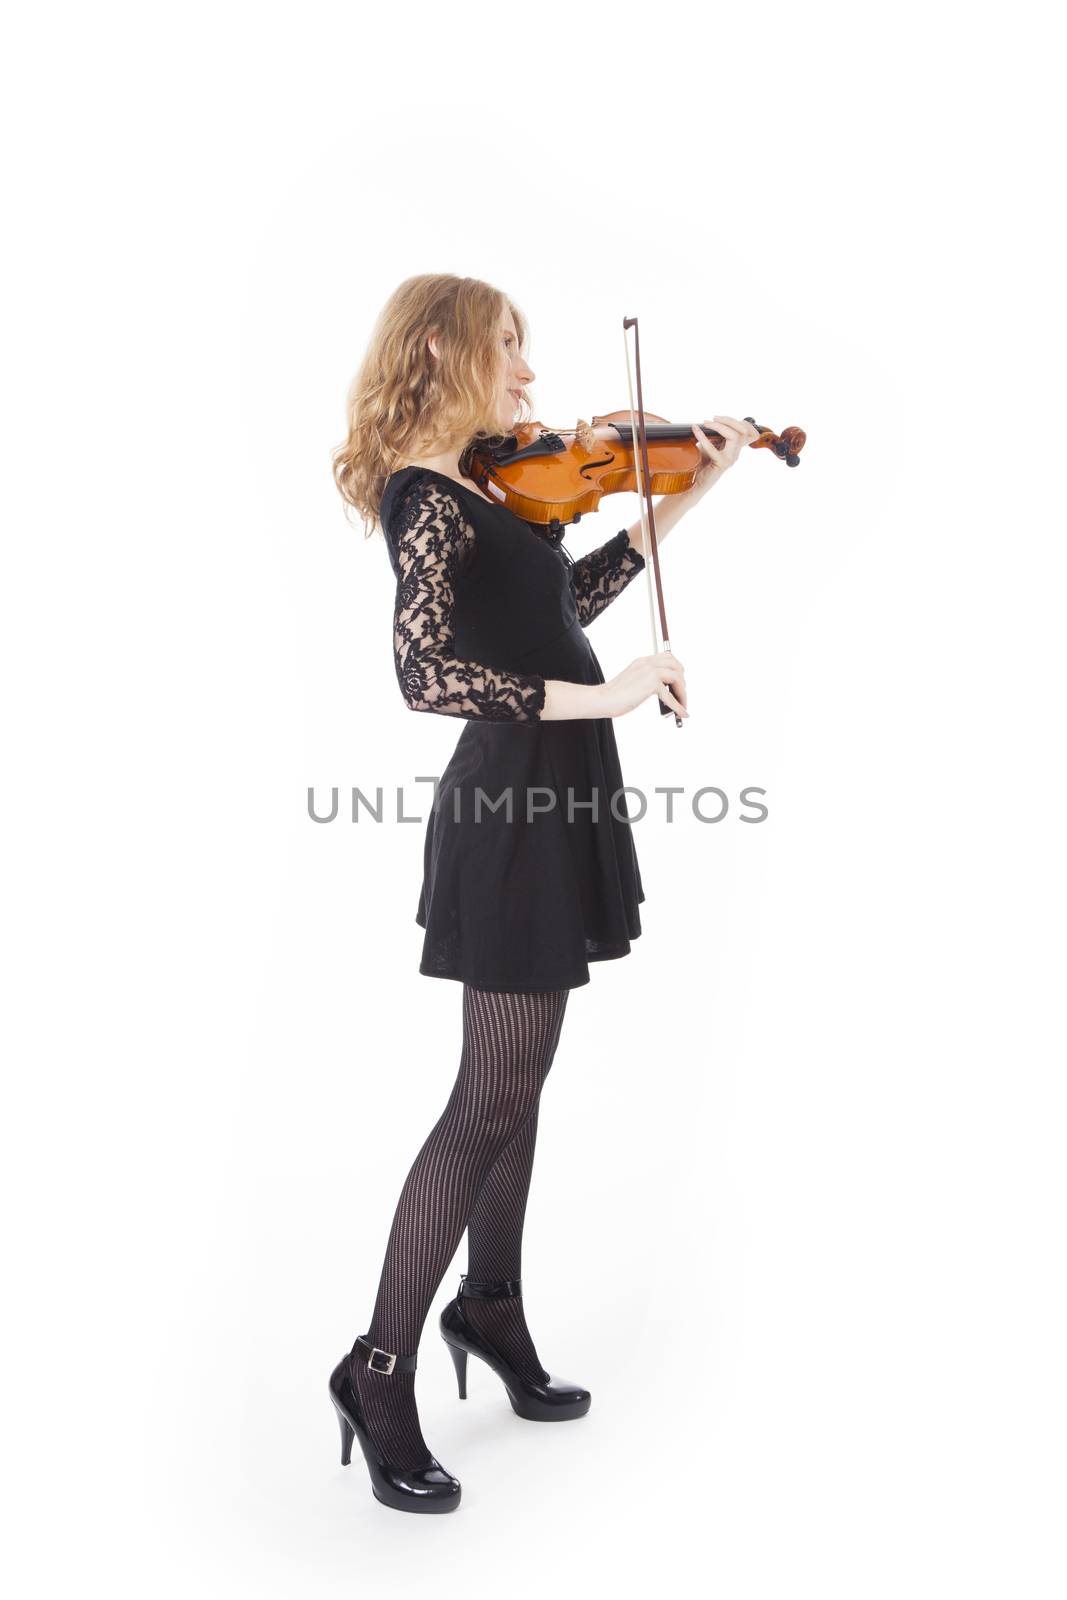 young woman in black dress playing violin by ahavelaar